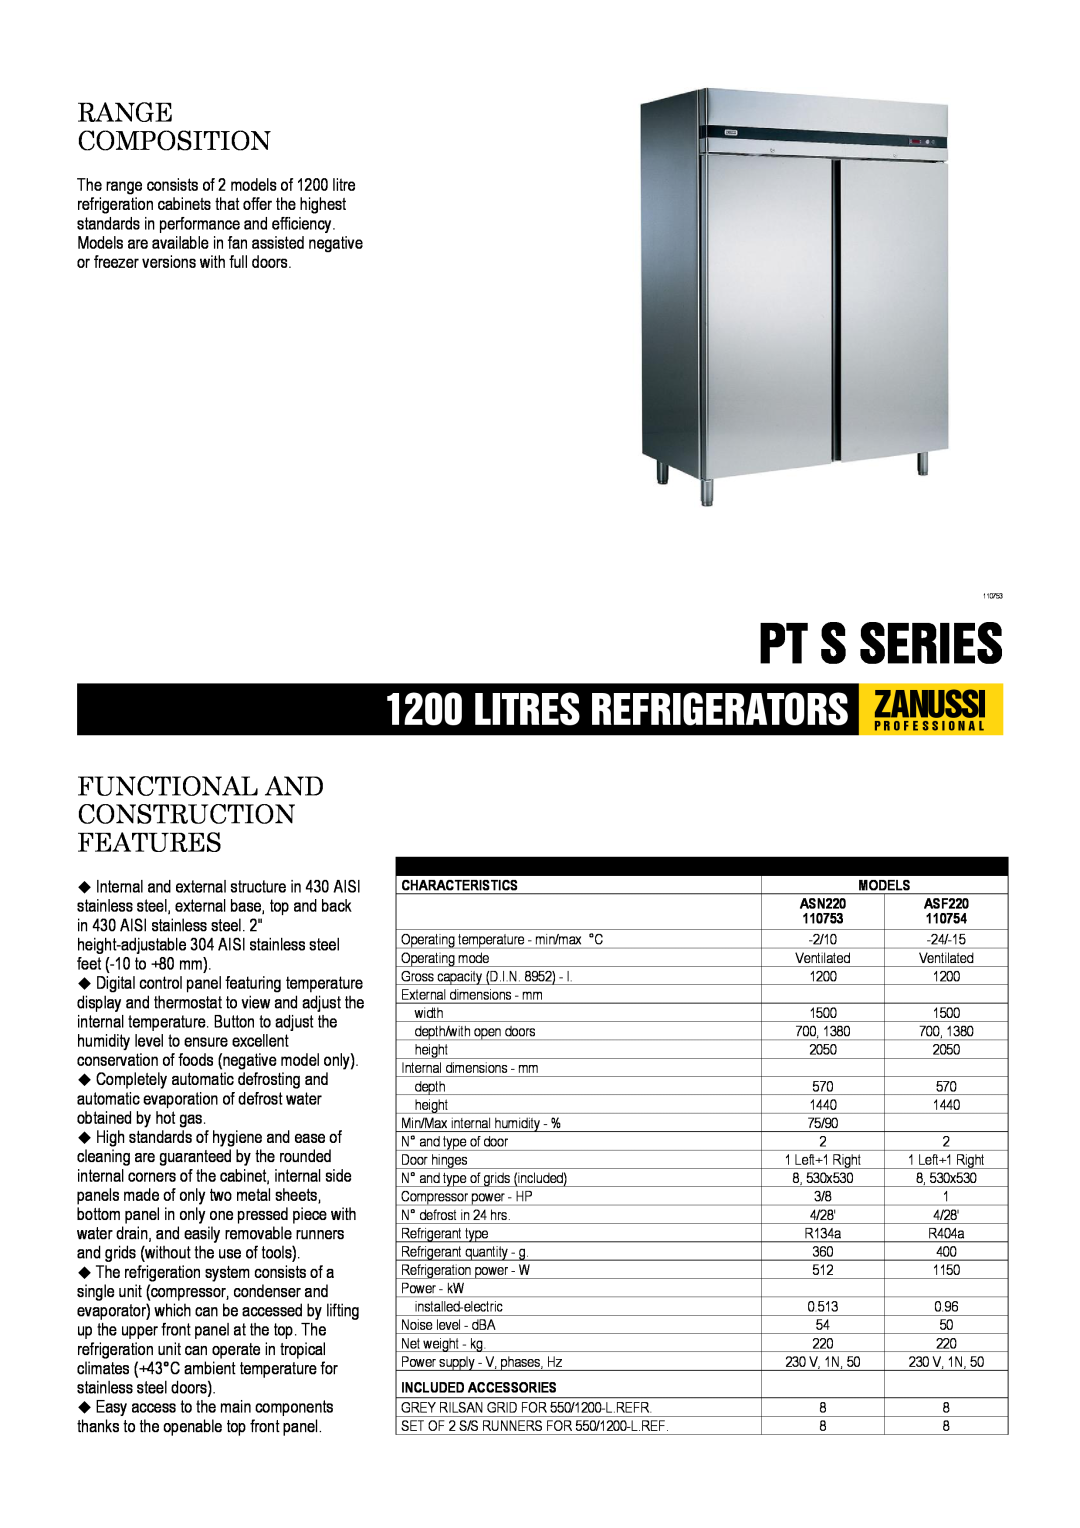 Zanussi ASF220, ASN220, 110754, 110753 dimensions Pt S Series, Range Composition, Functional And Construction Features 